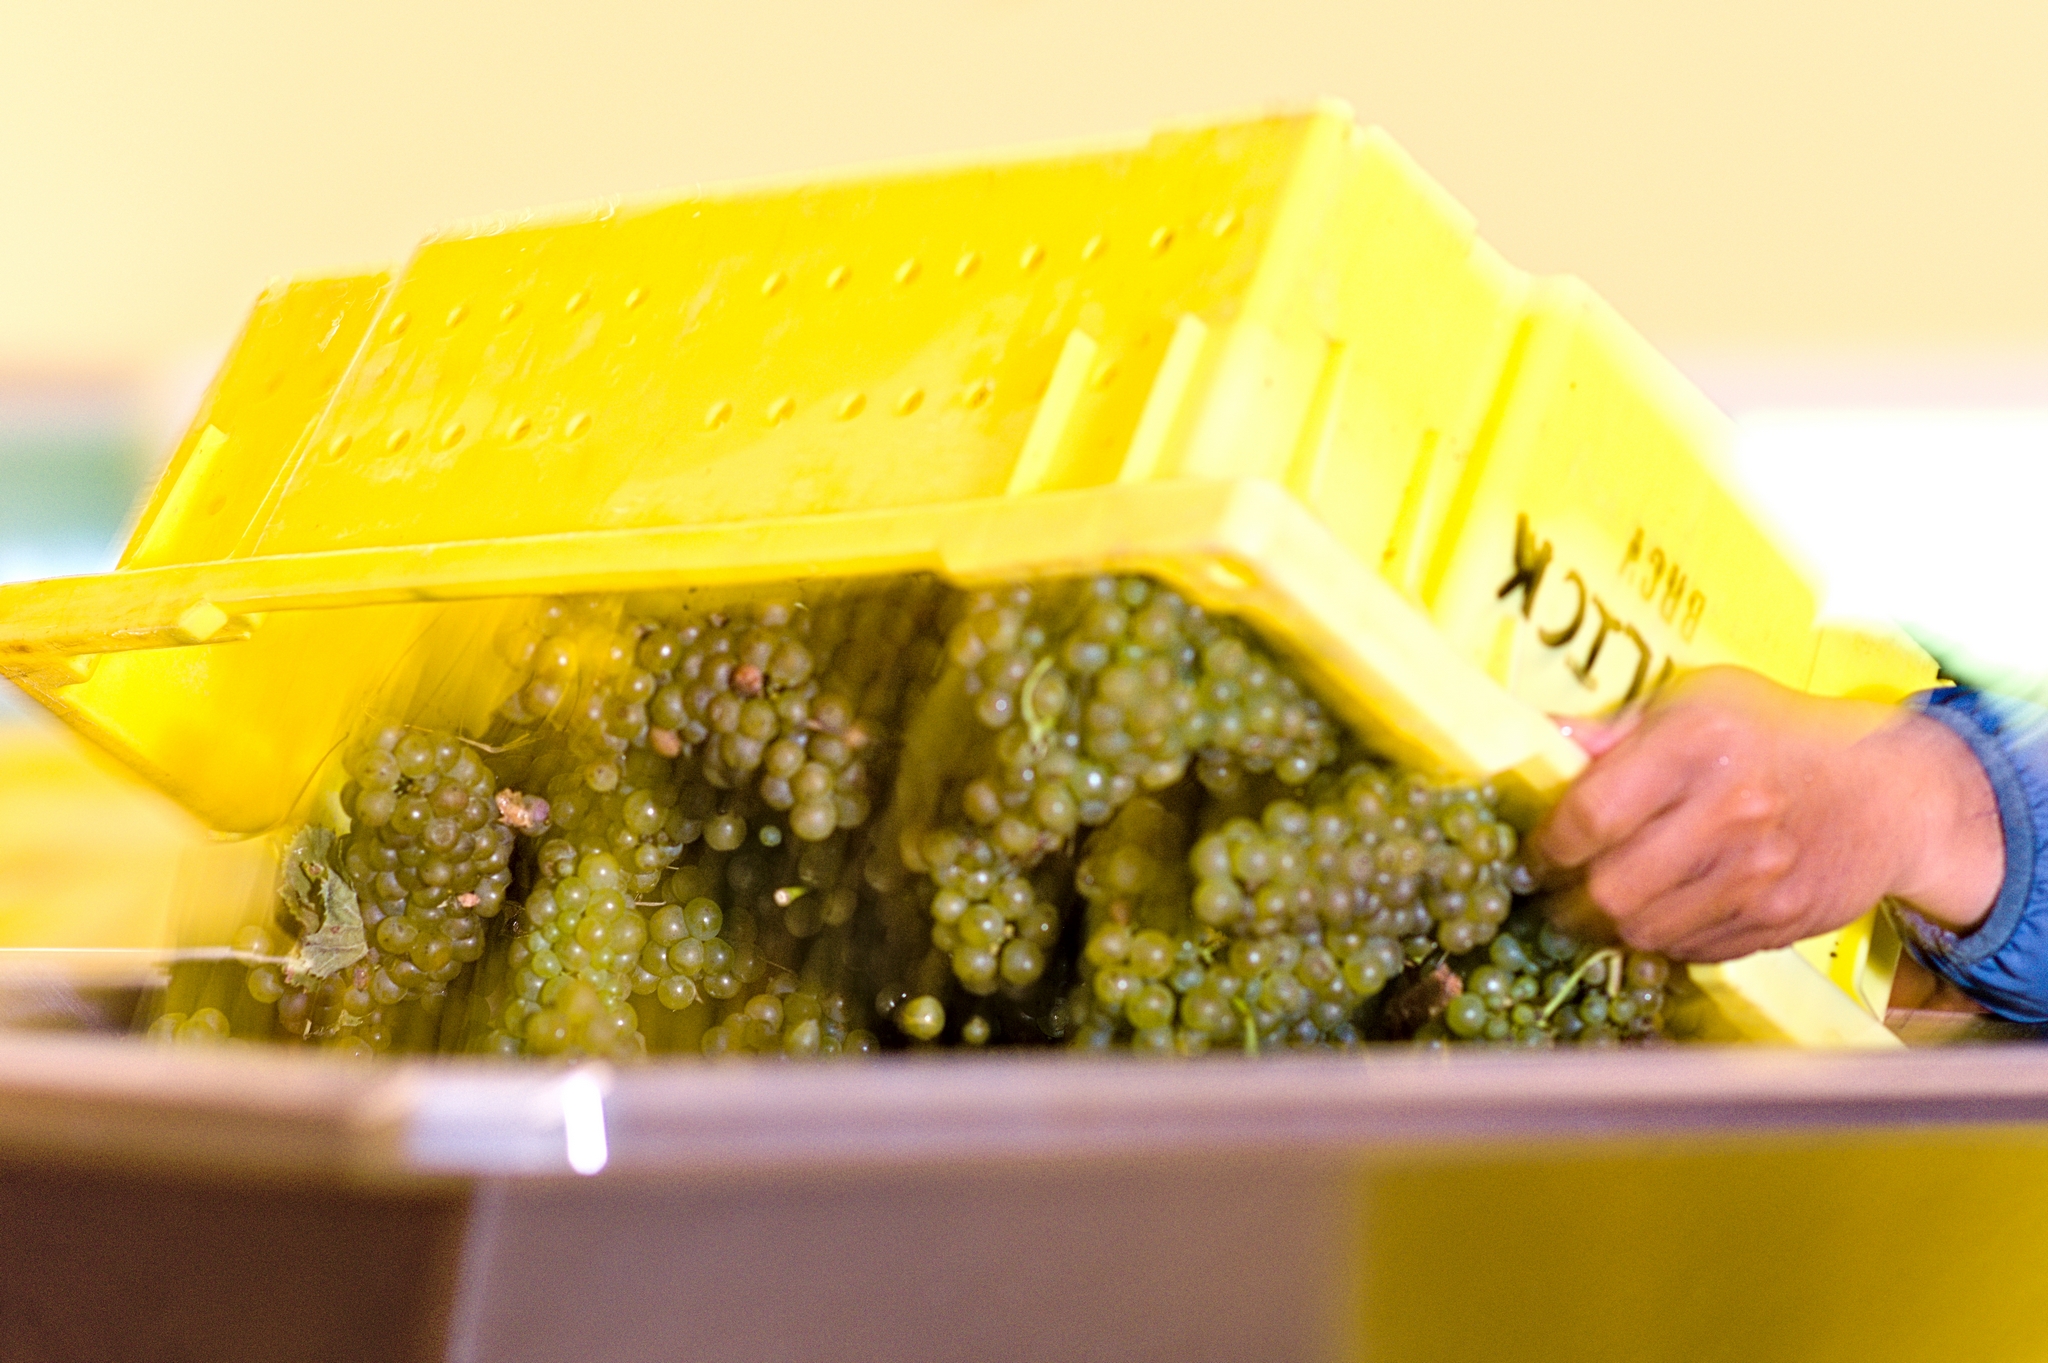 Dumping grapes in the press